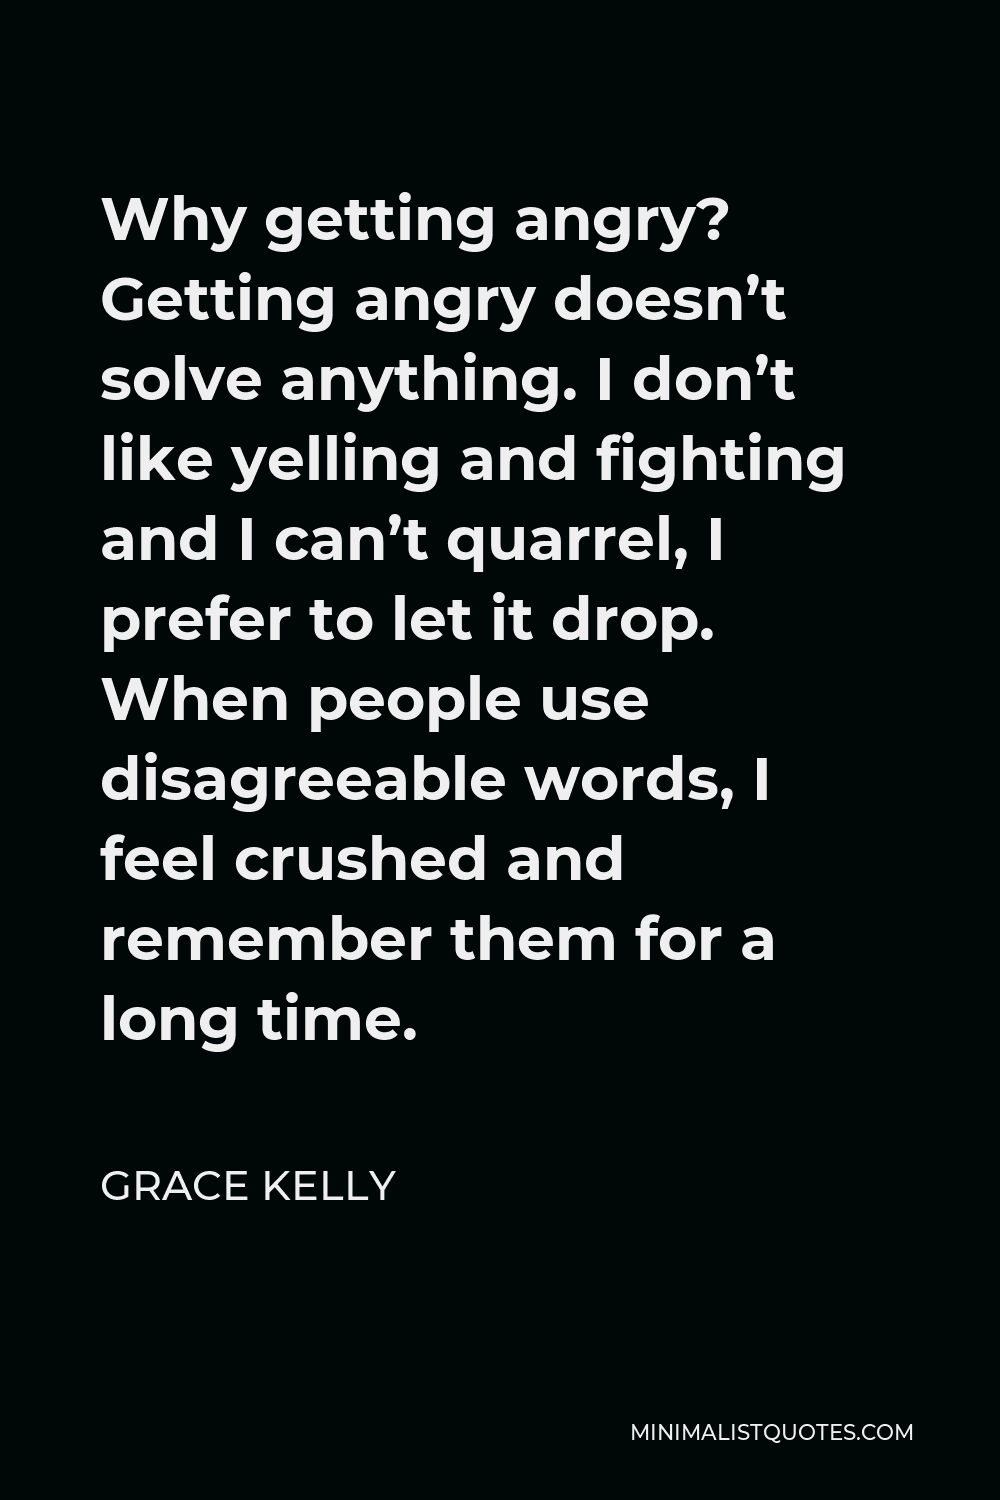 Grace Kelly Quote - Why getting angry? Getting angry doesn’t solve anything. I don’t like yelling and fighting and I can’t quarrel, I prefer to let it drop. When people use disagreeable words, I feel crushed and remember them for a long time.